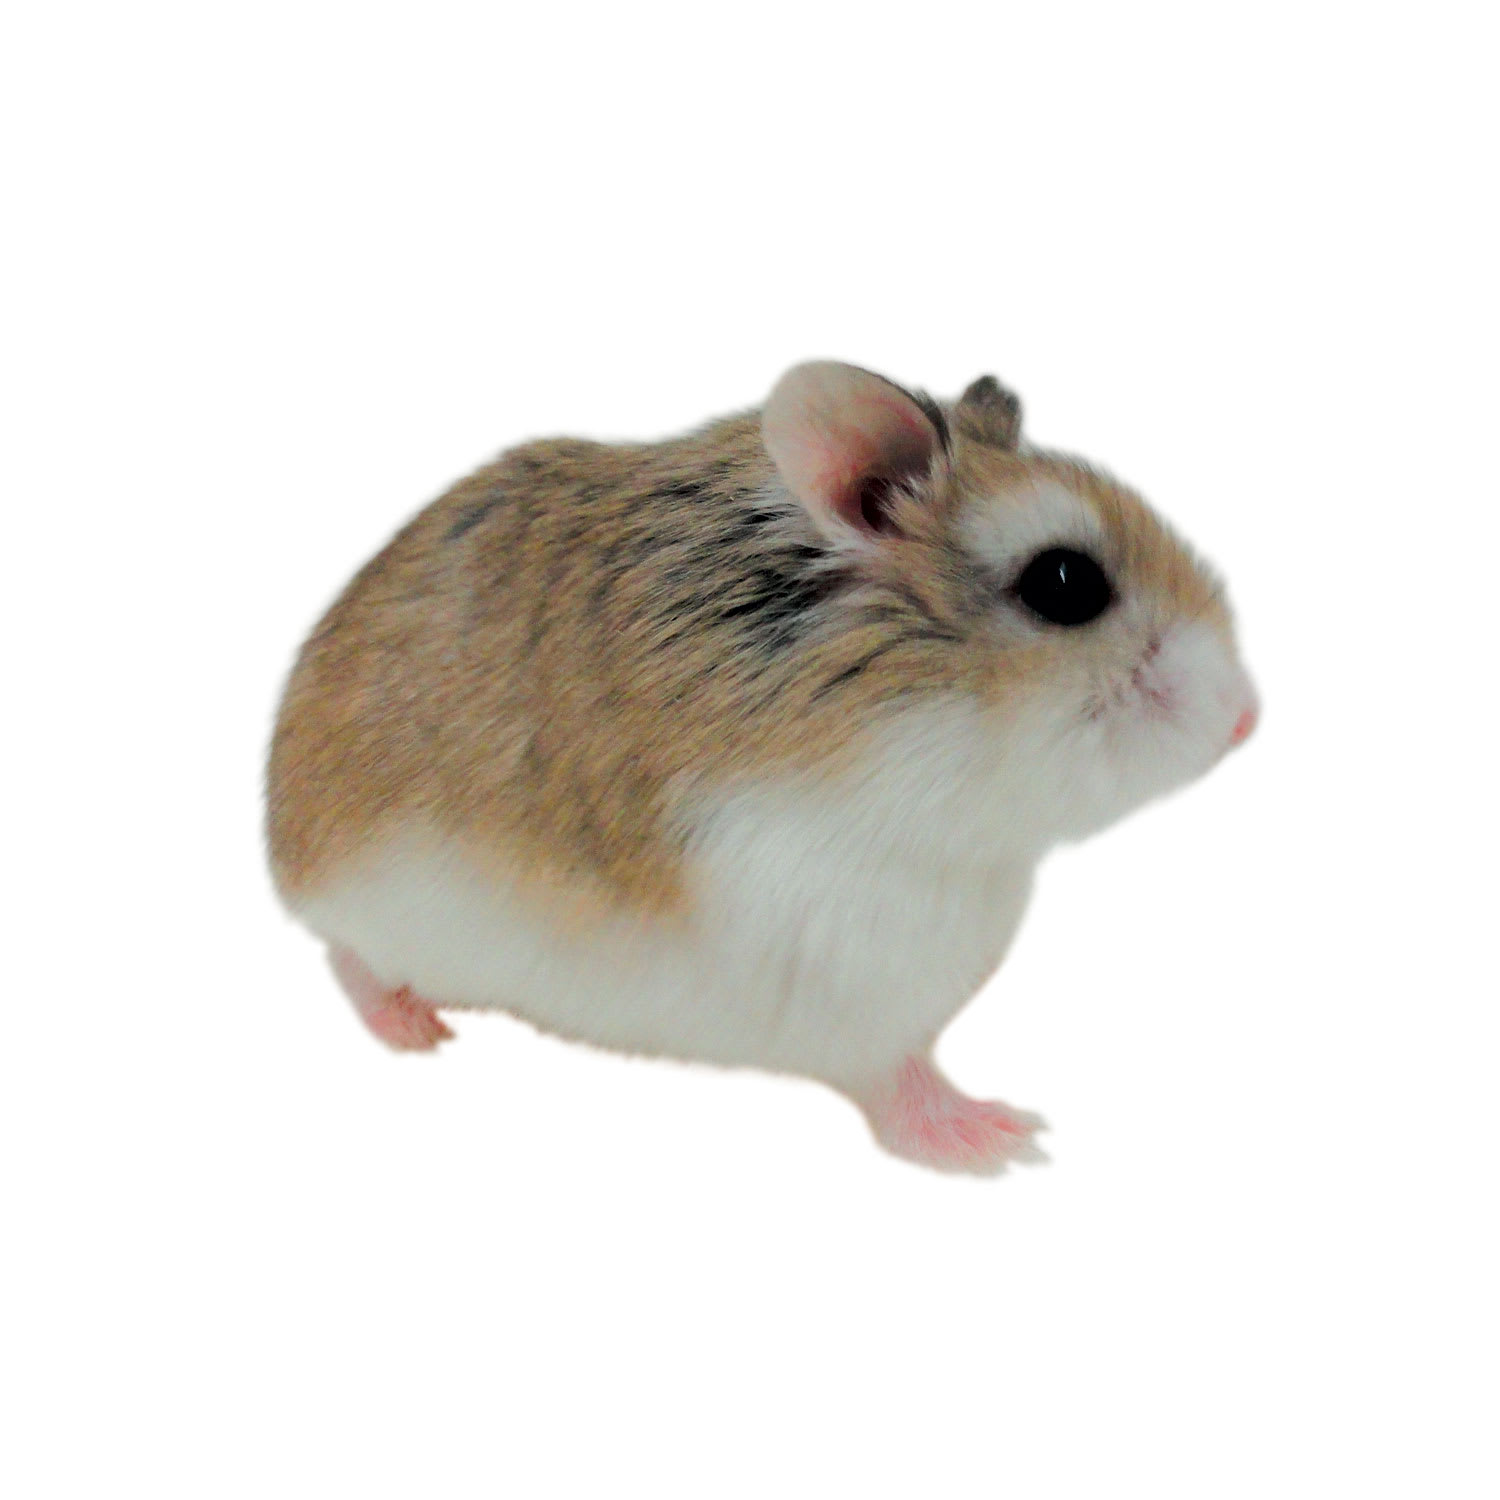 Roborovski Hamsters For Sale Robo Dwarf Hamsters For Sale Petco,Coin Stores Near Me